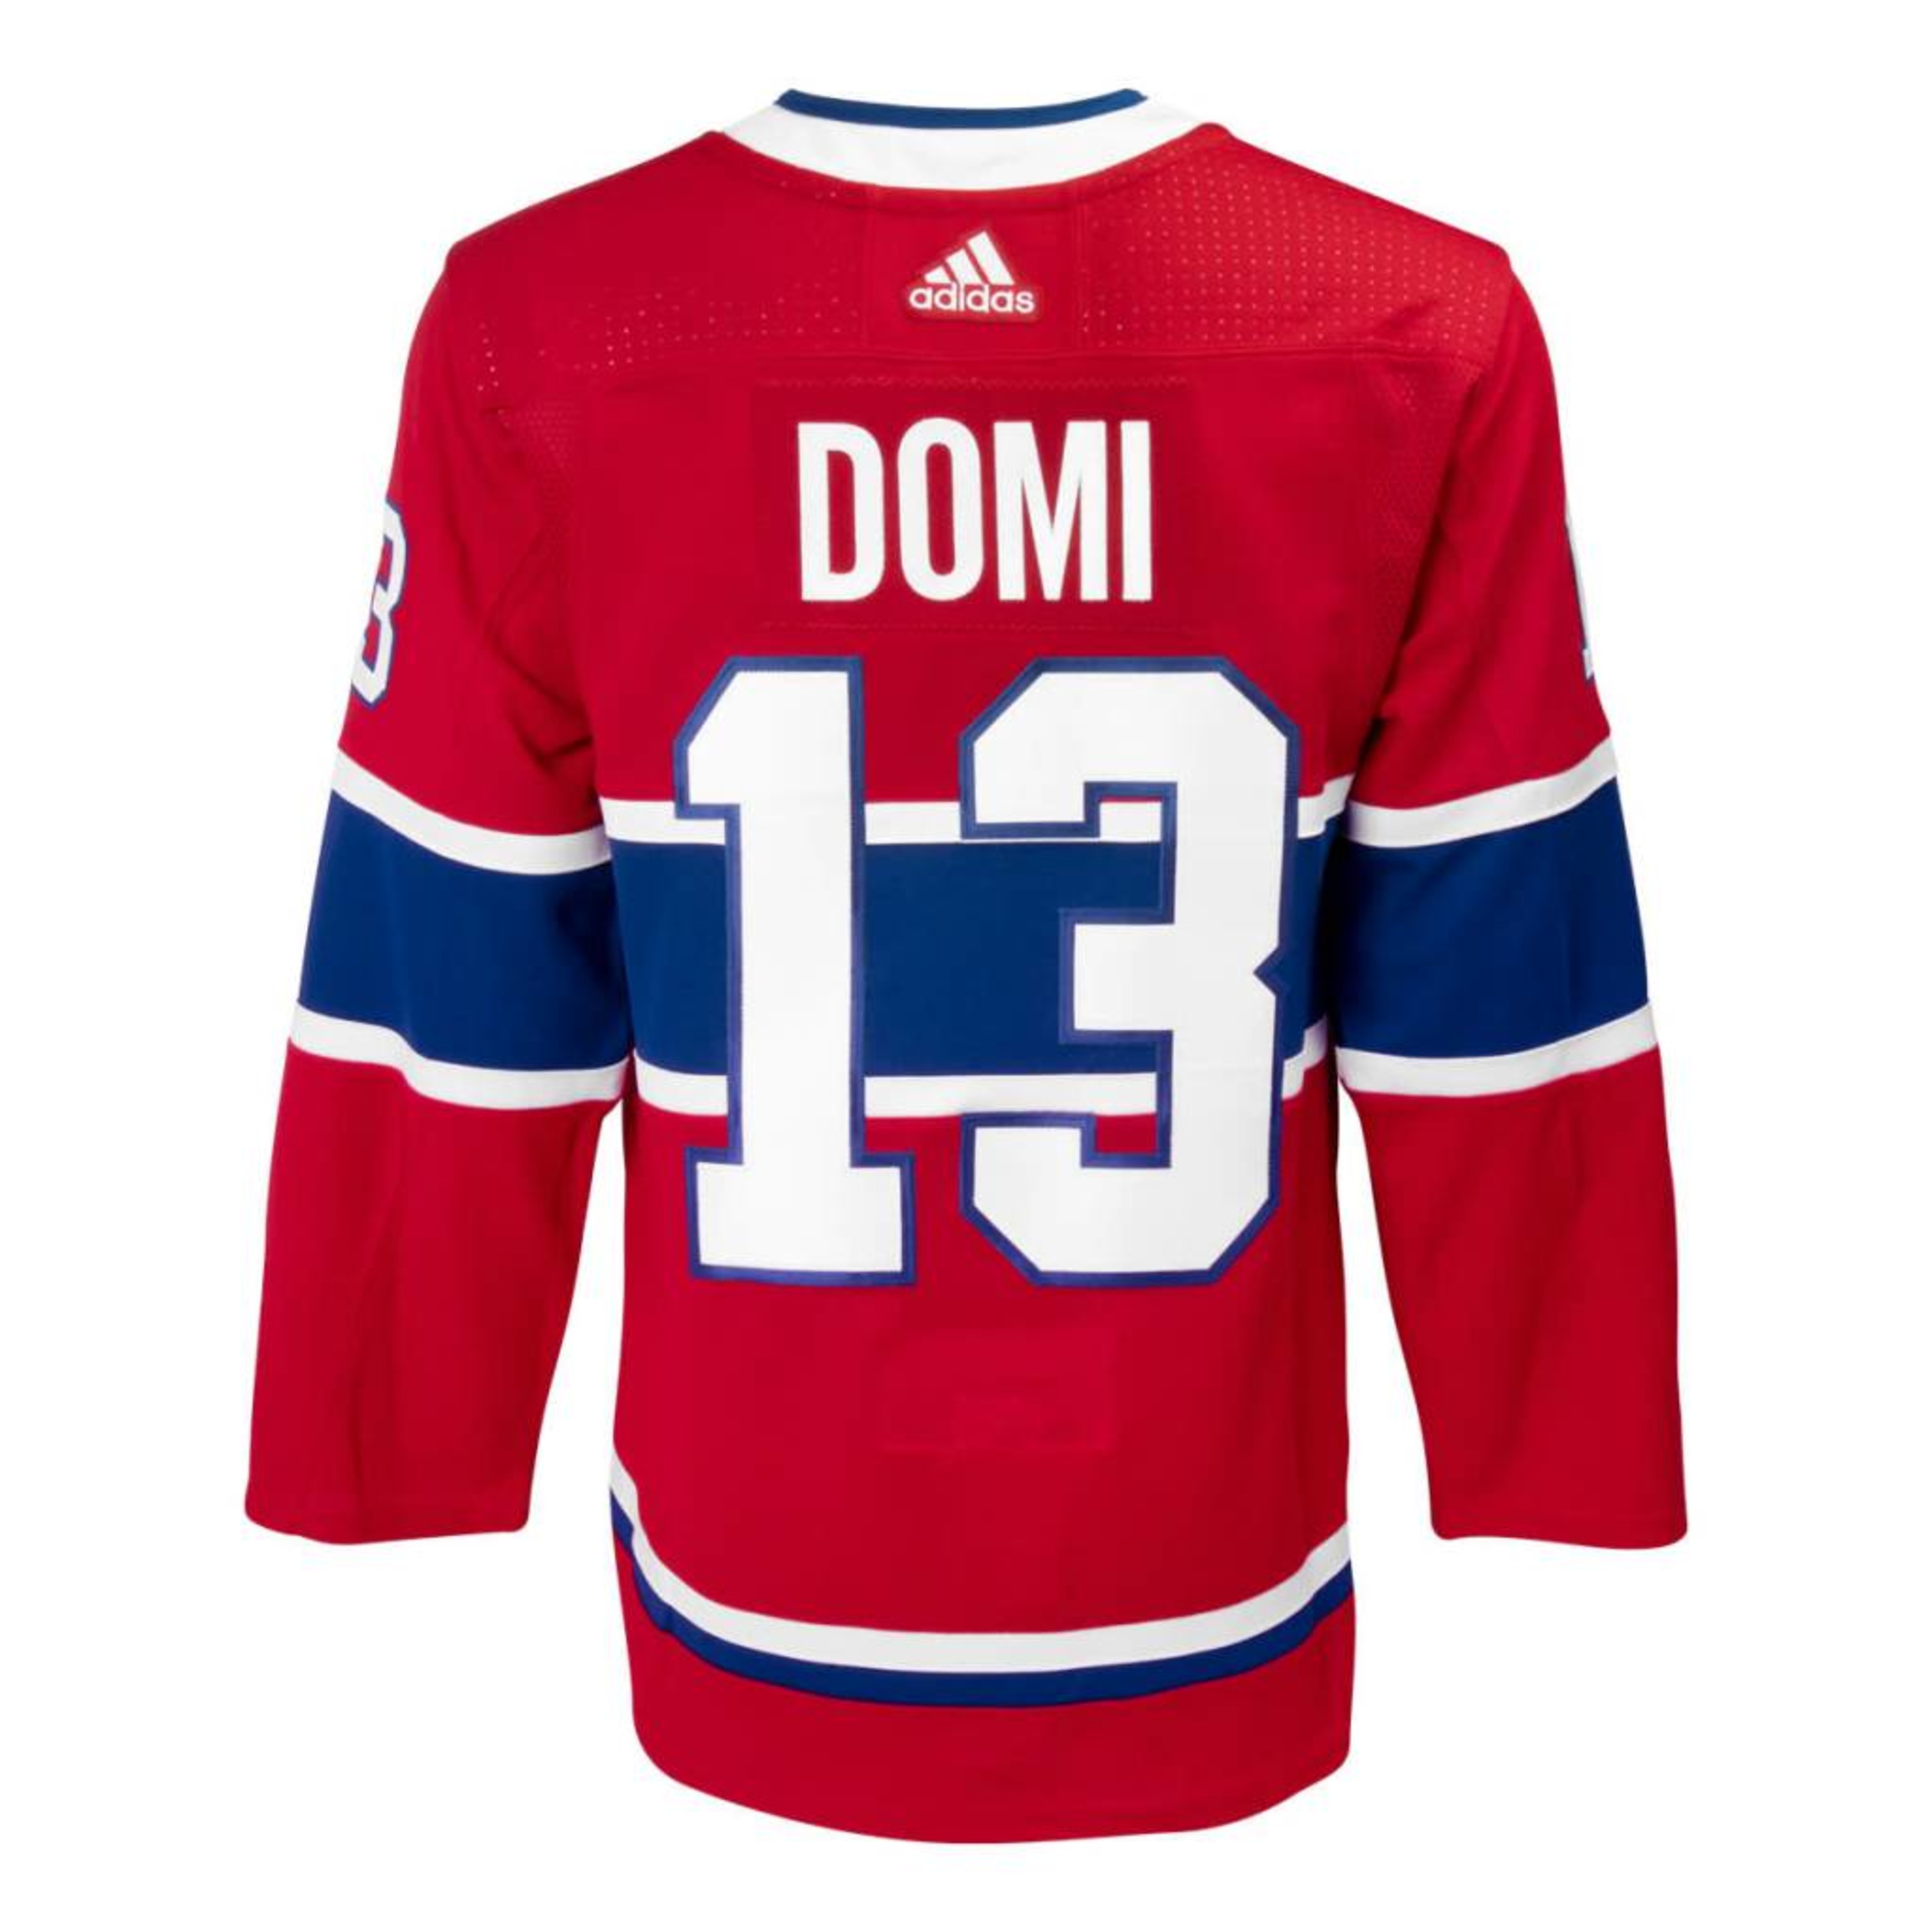 NHL Hockey Montreal Canadiens Habs Max Domi #13 Sewn Jersey Sz: 52 adidas  (**Free Shipping in USA & Canada**)(Give me your Best Offer)